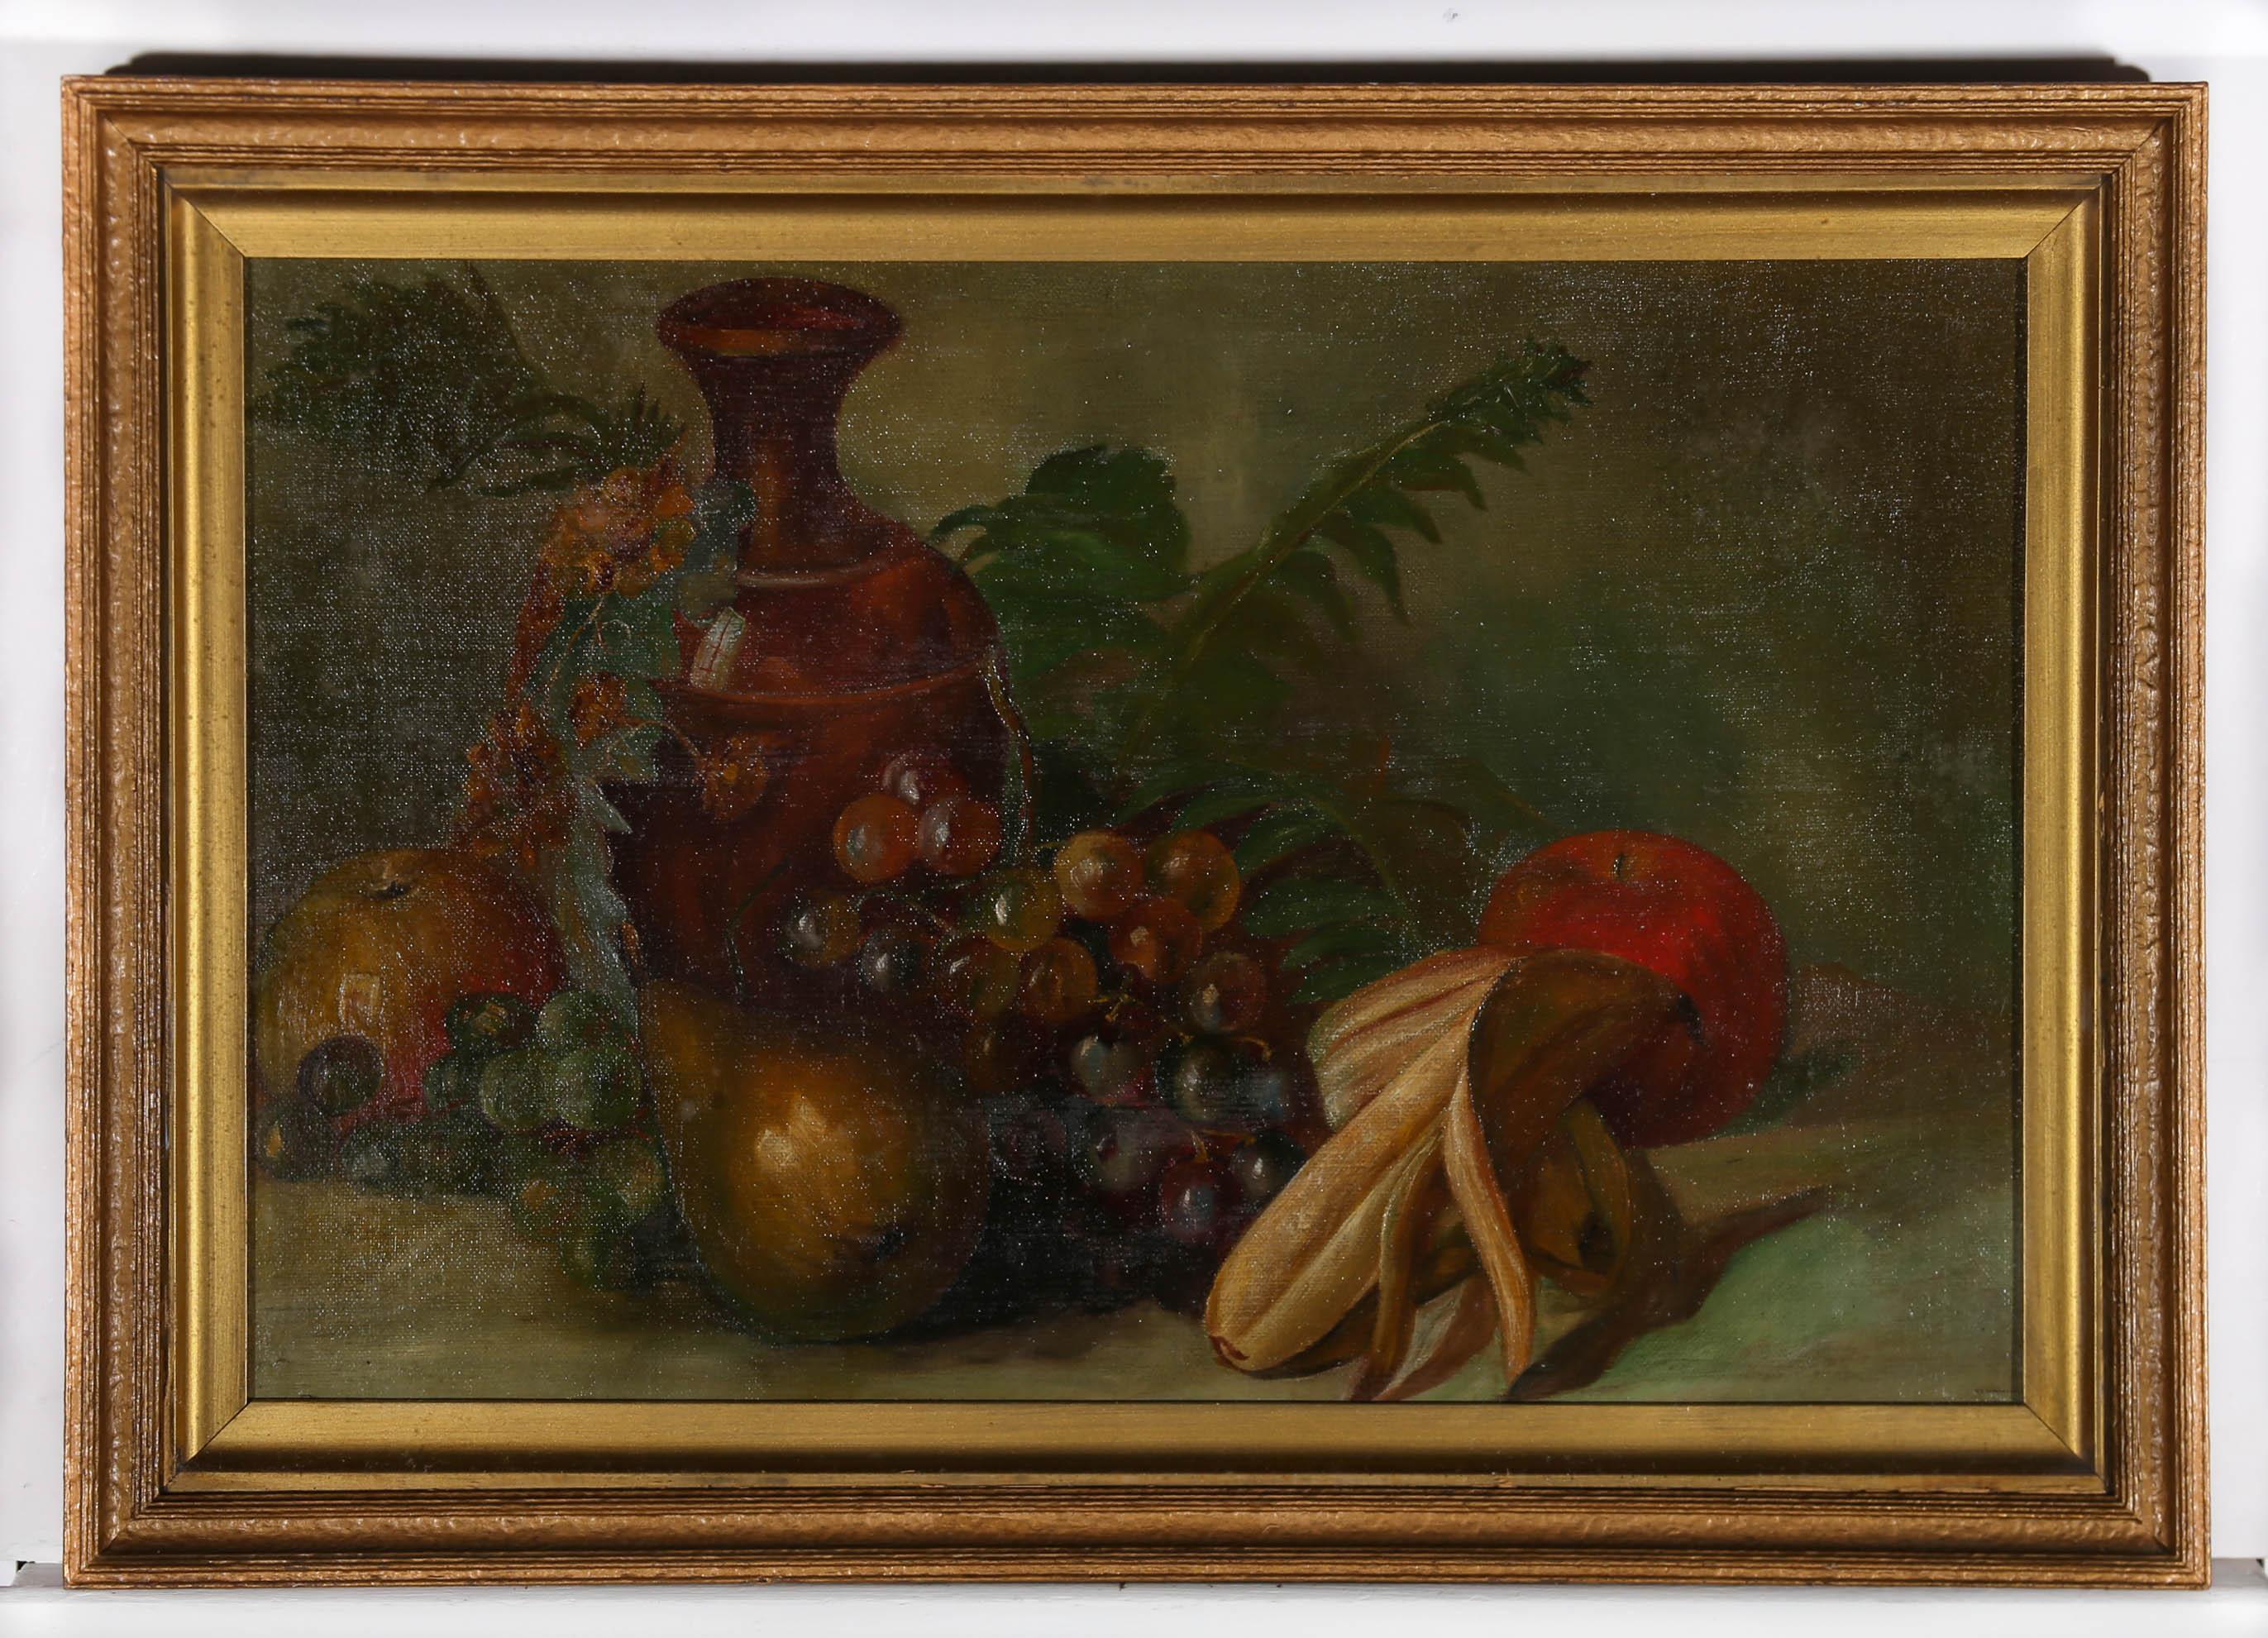 A charming still life study depicting a jug surrounded by various fruit and foliage. the artist captures the scene against a dark background with brings out the colours in the fruits. Unsigned. Presented in a glazed gilt frame. On canvas board.
